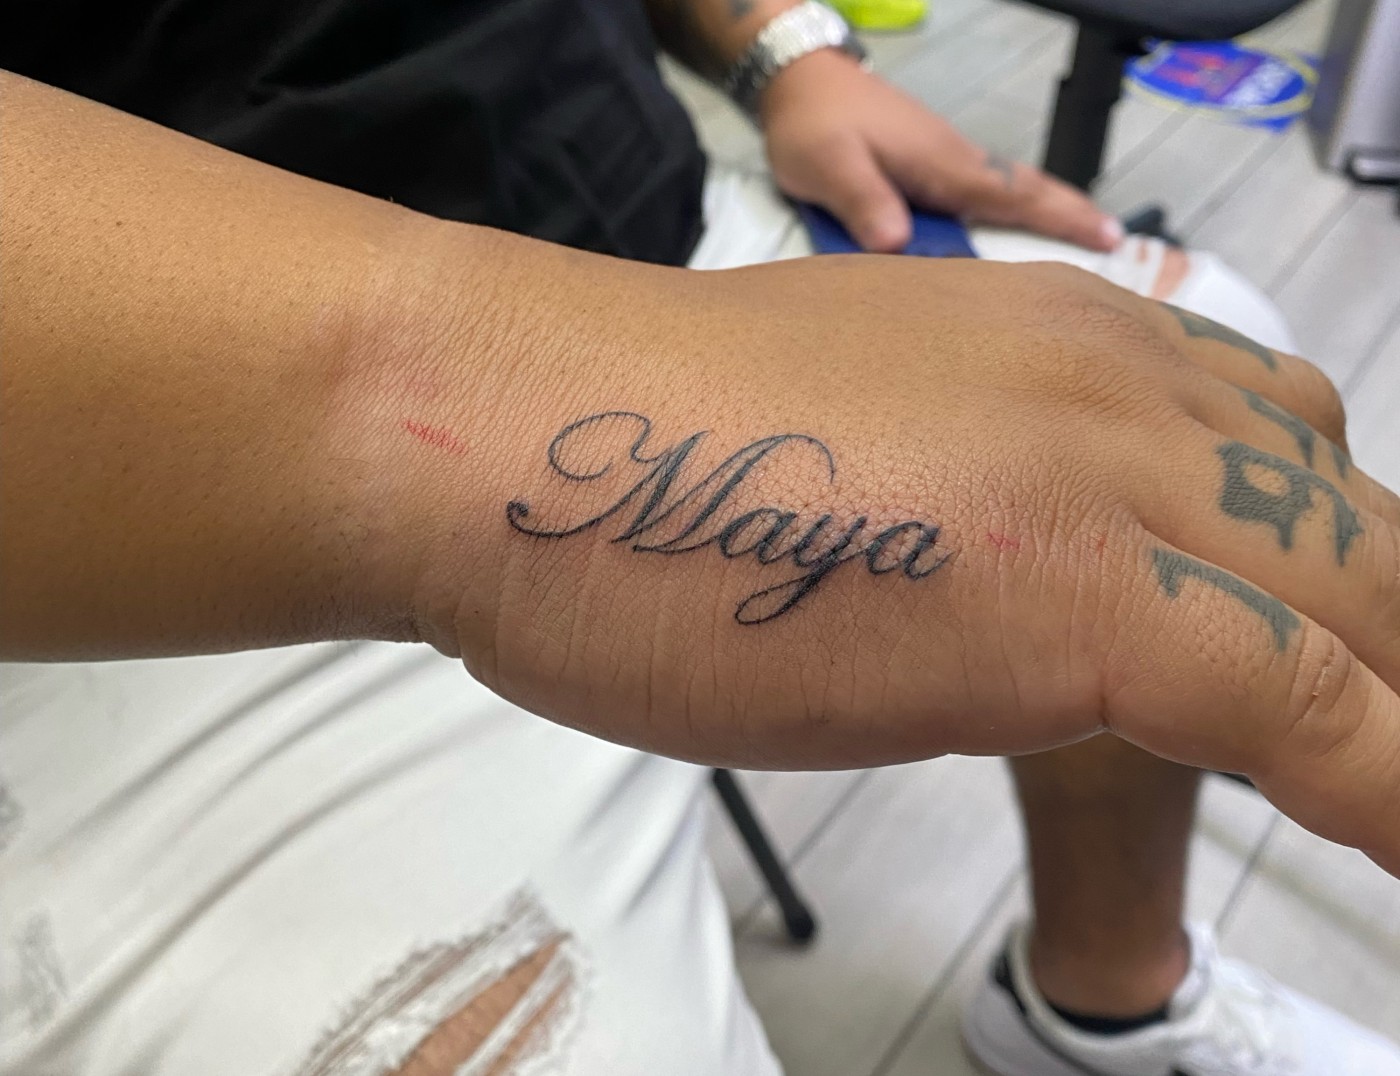 "Maya" Fine Line Lettering Script Tattoo By Rene Cristobal, a guest tattoo artist at Iron palm Tattoos. Script tattoos are a popular of memorializing friends and family we want to keep close to us at all times. Rene comes to us from Vision Tattoo Studio in Concepcion, Chile. He is available for booking on September 11th, 2023. Call 404-973-7828 or stop by for a free consultation. Walk Ins are welcome.